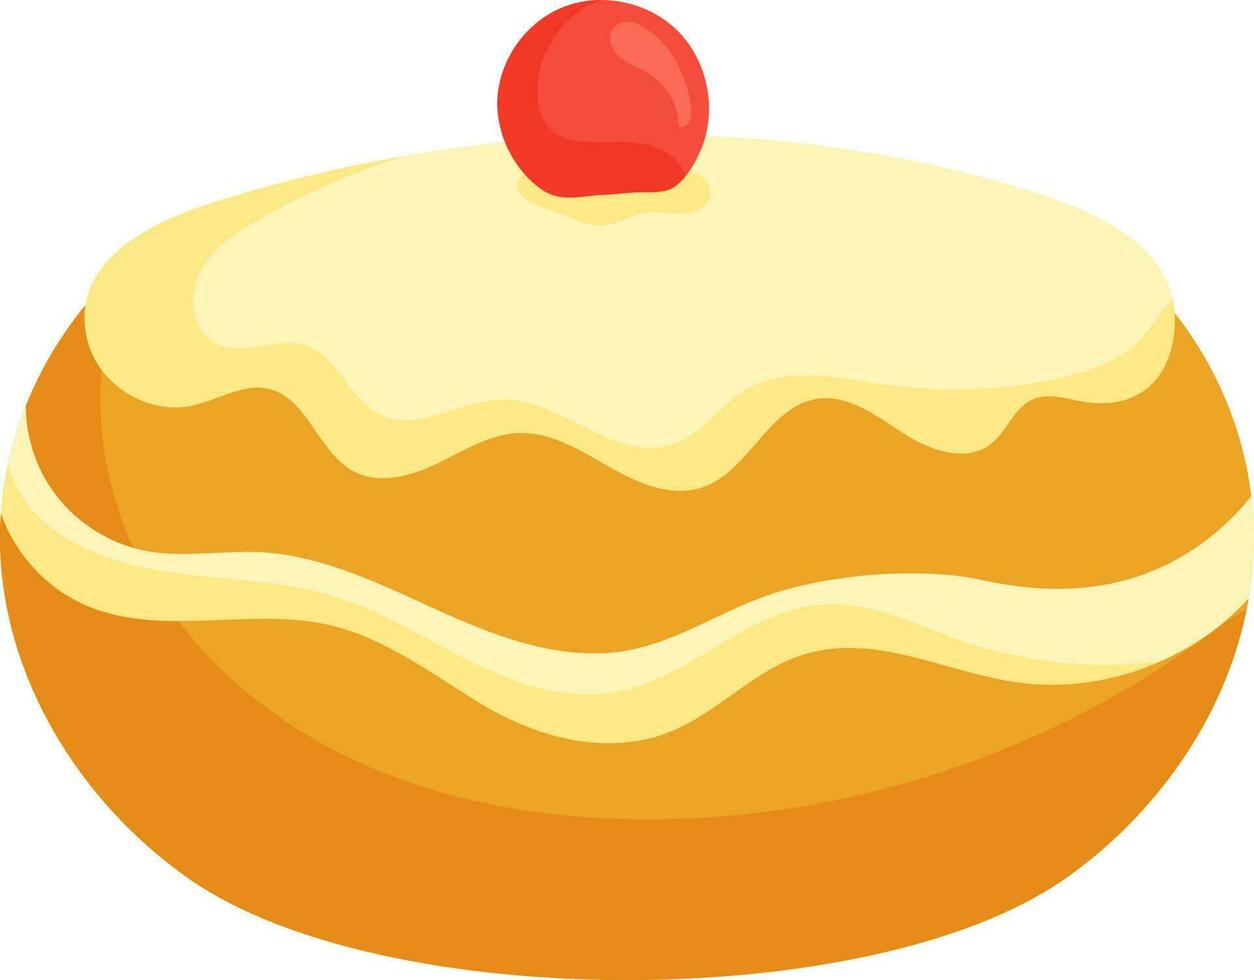 Tasty Sufganiyah Icon In Yellow And Red Color. vector